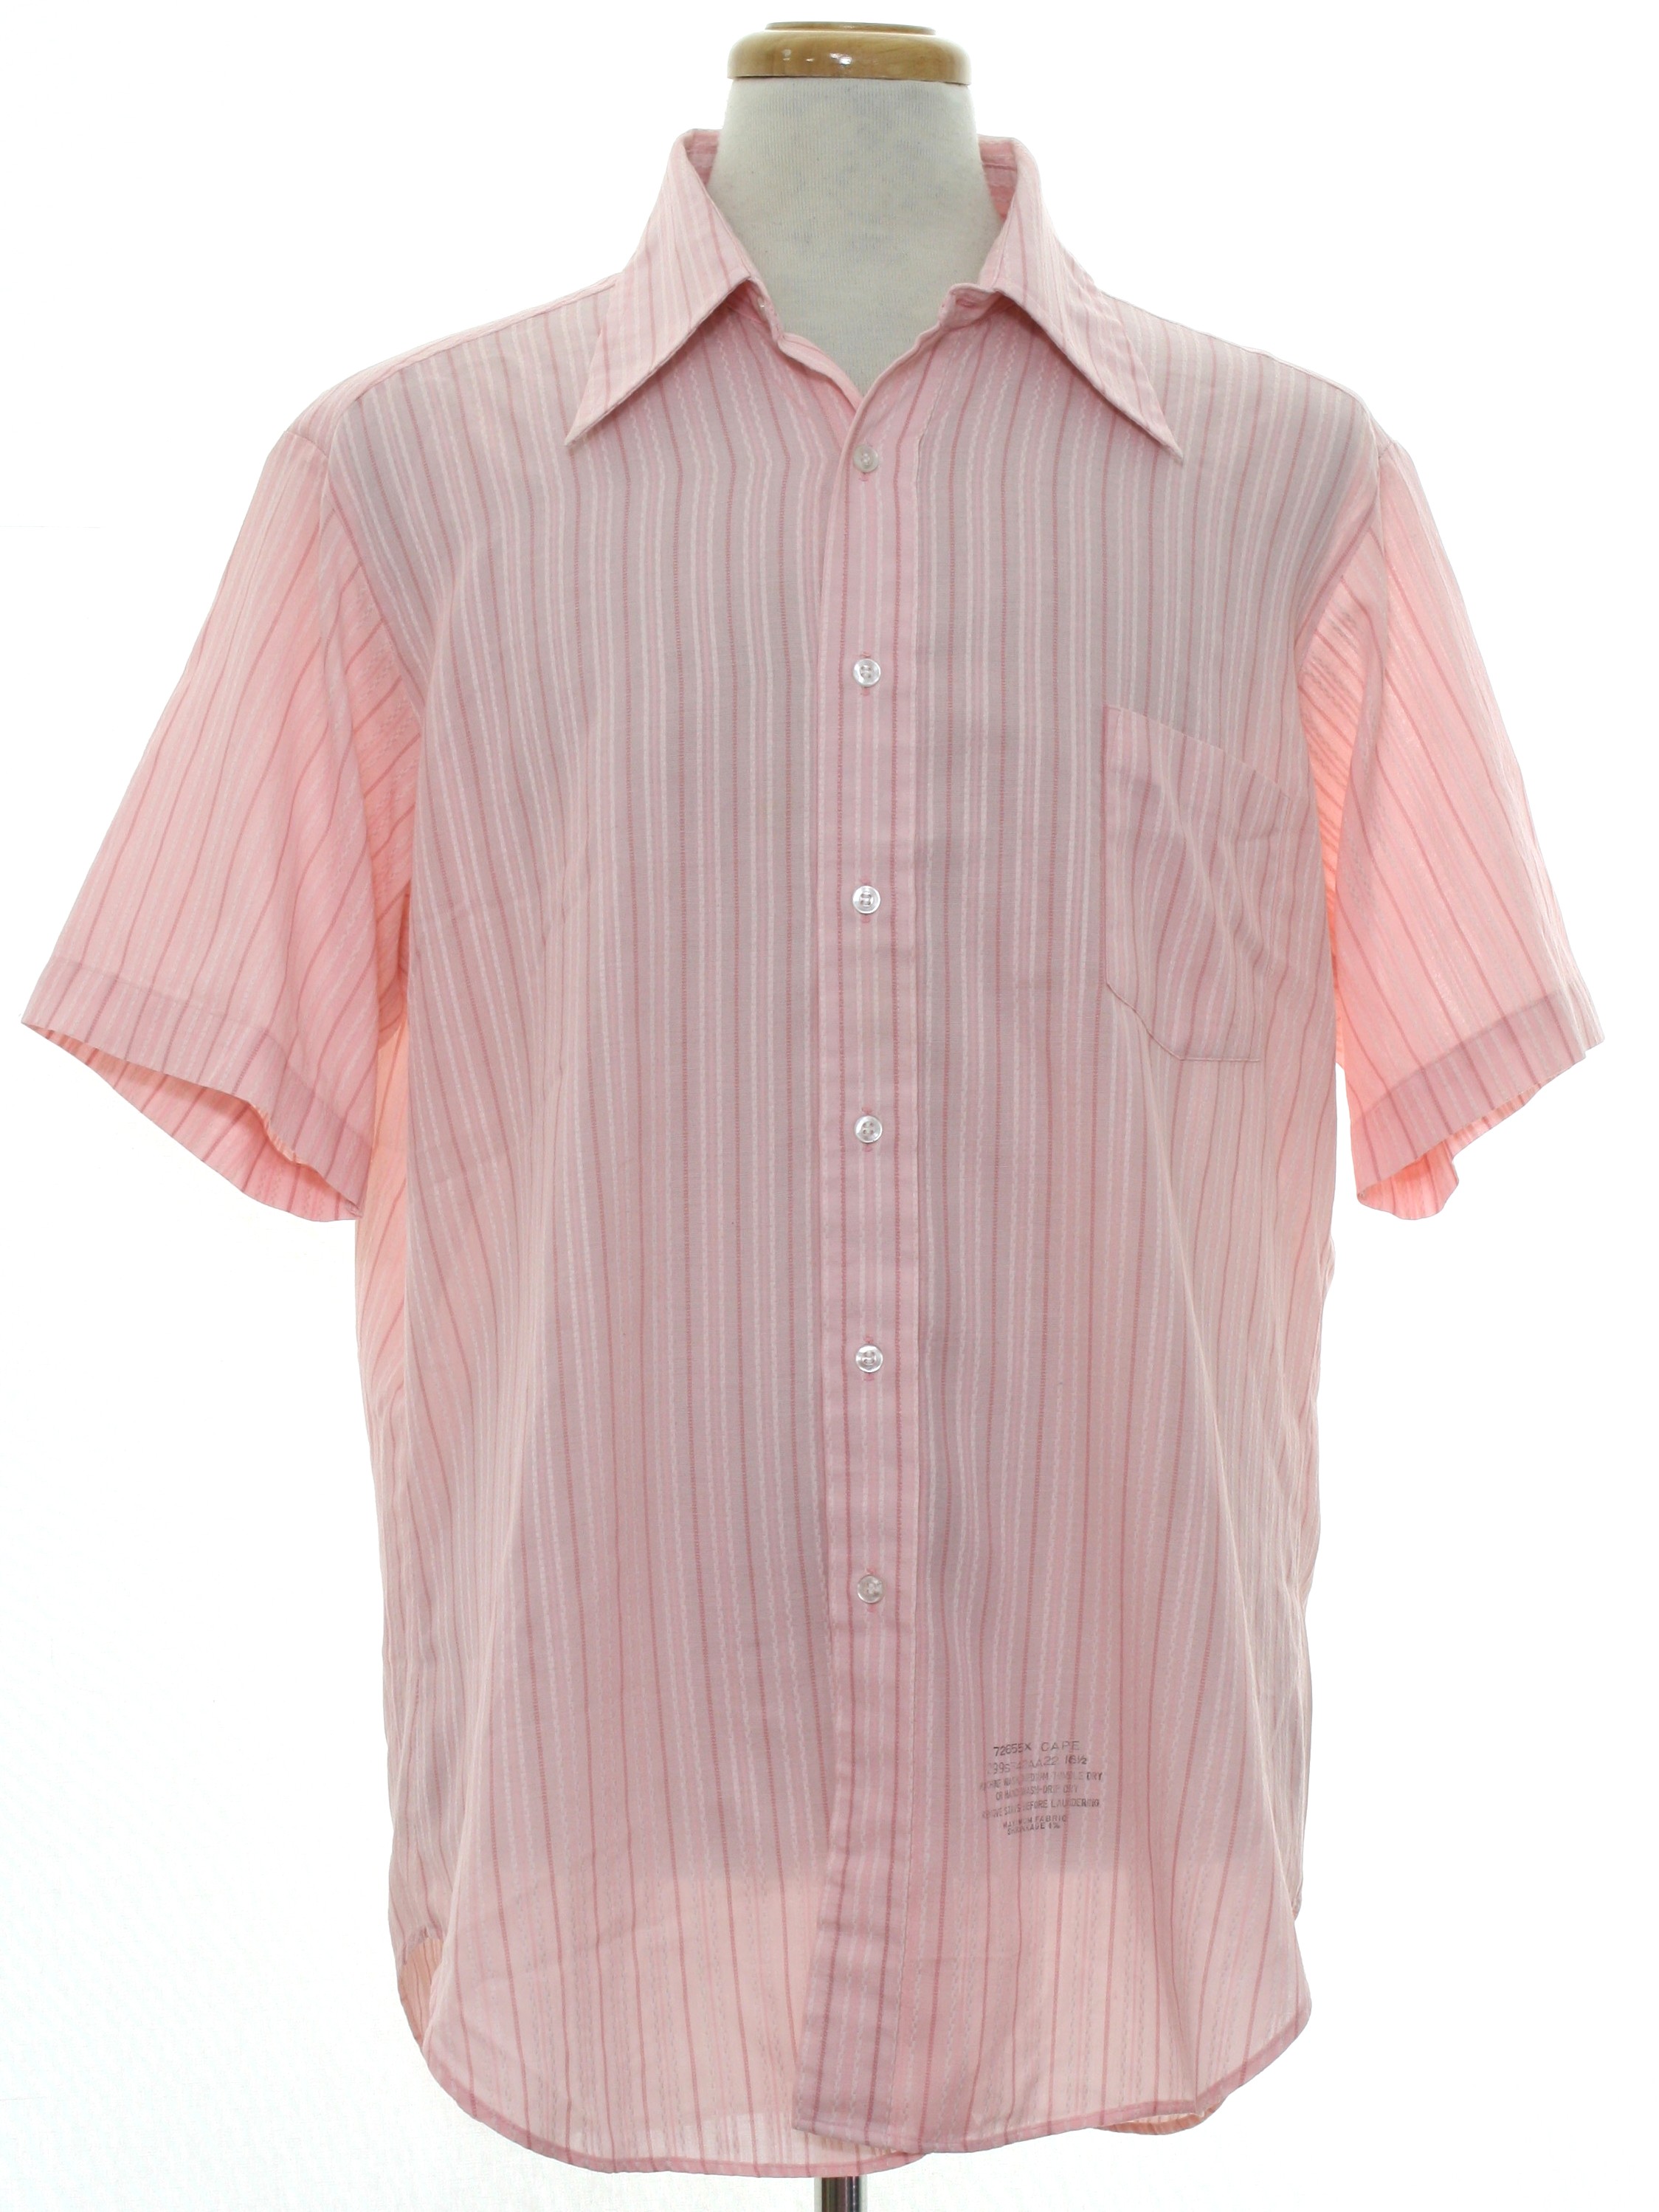 1970's Retro Shirt: 70s -Sears Mens Store- Mens pink background cotton ...